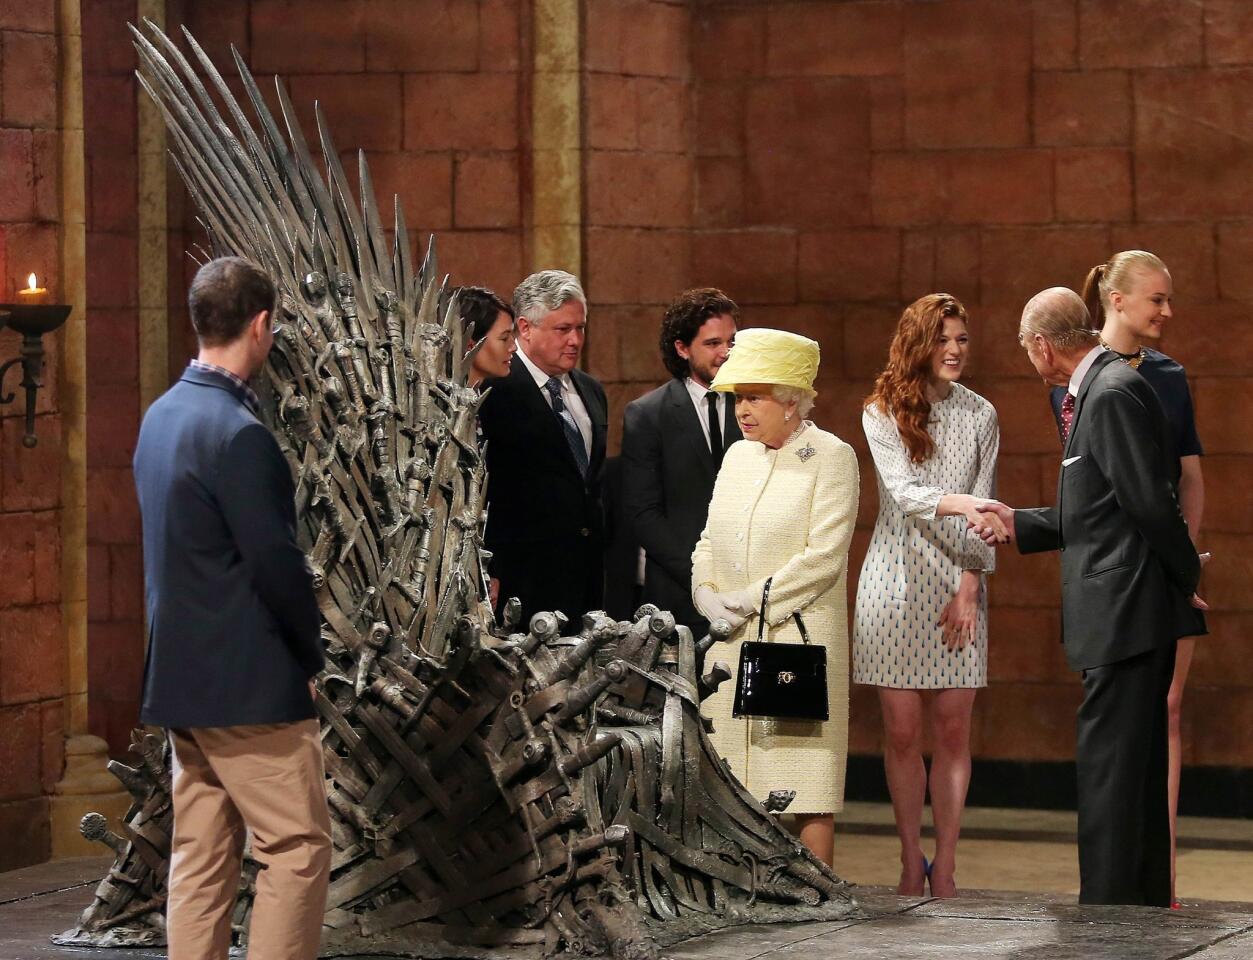 The queen meets cast members of the HBO TV series "Game of Thrones." Prince Philip, the duke of Edinburgh, shakes hands with Rose Leslie (Ygritte).